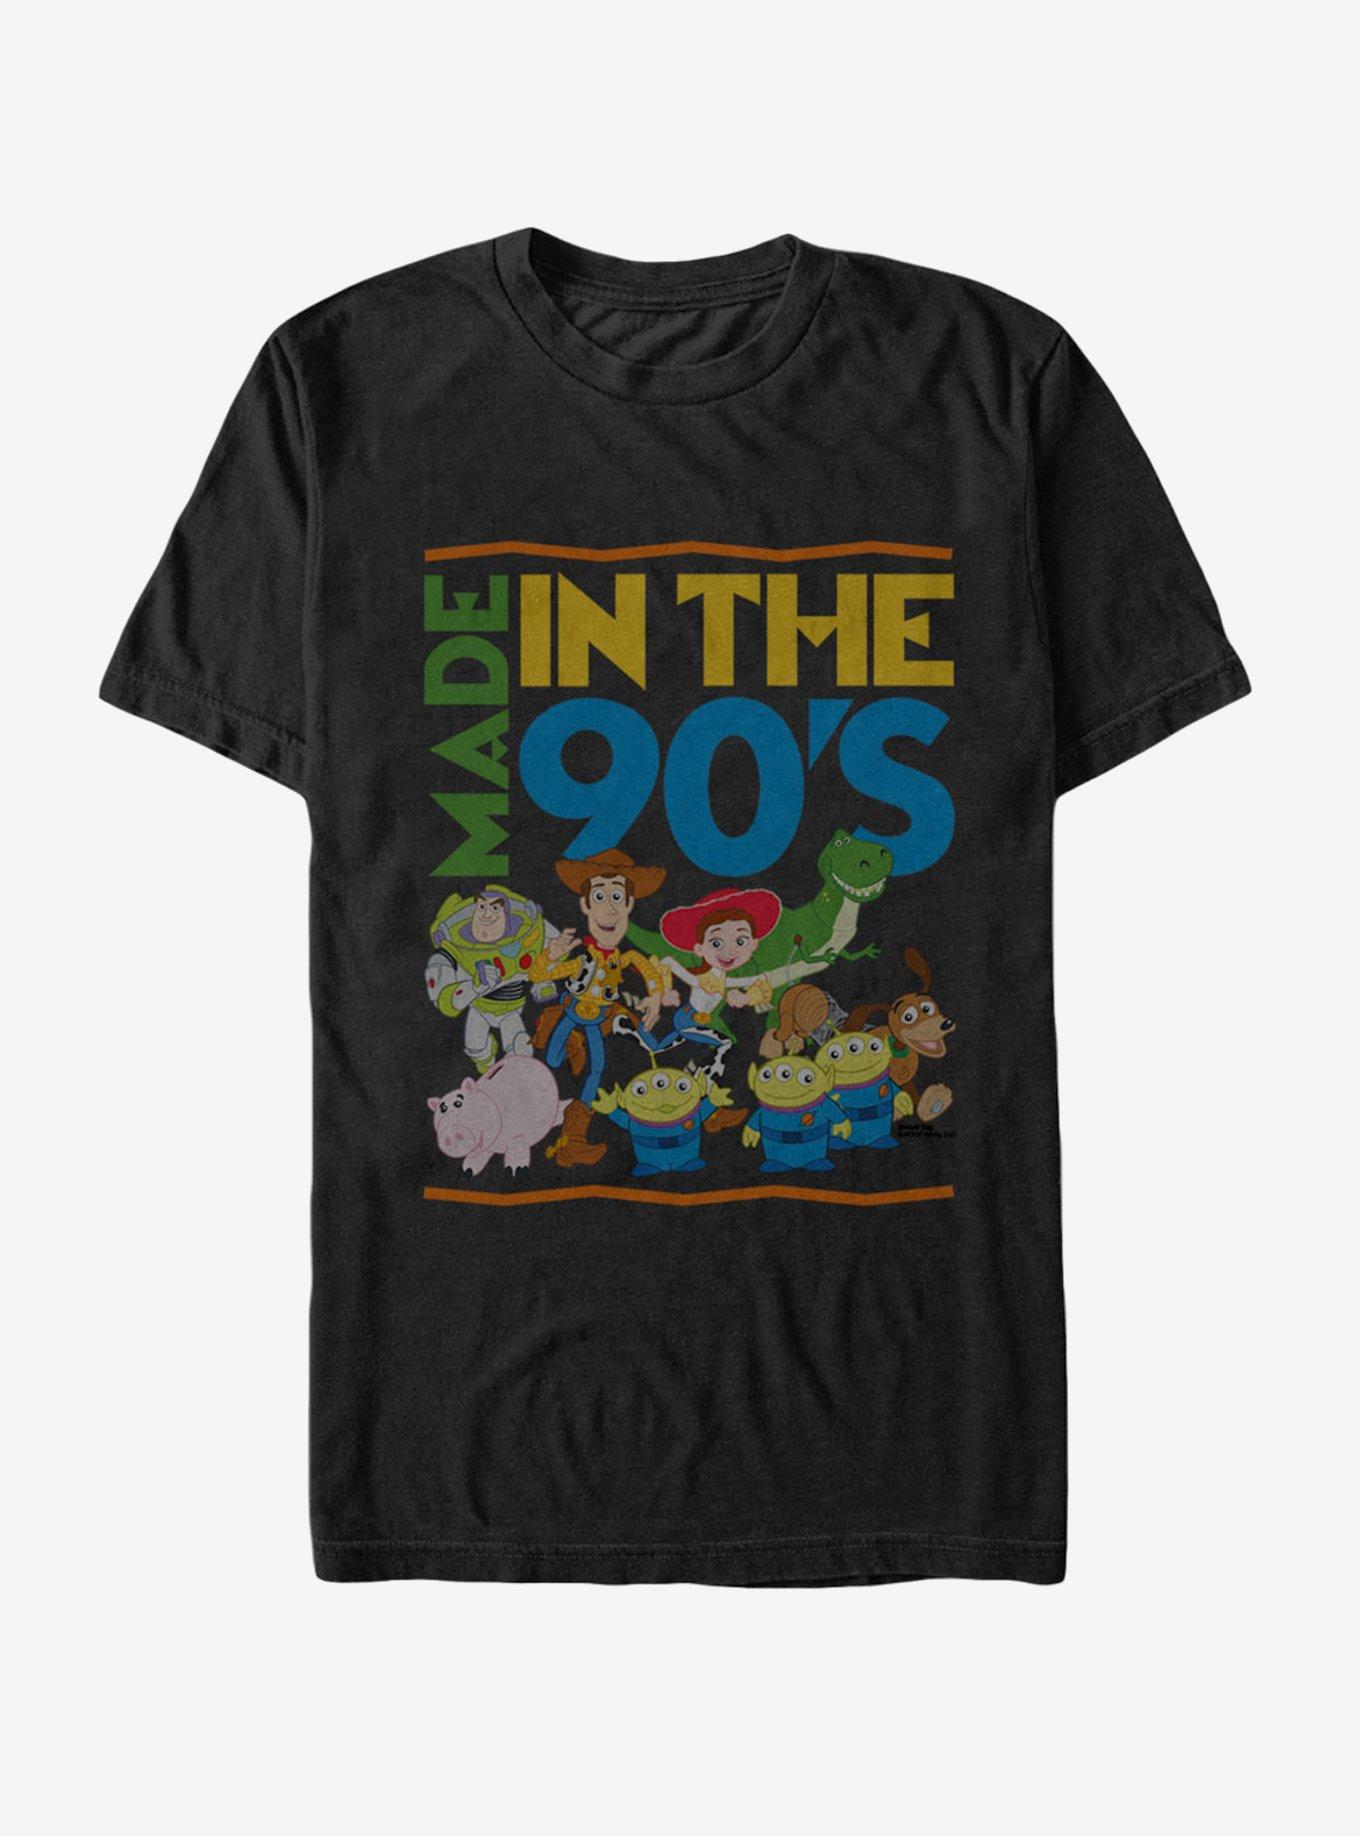 Toy Story Made in the 90's T-Shirt, BLACK, hi-res